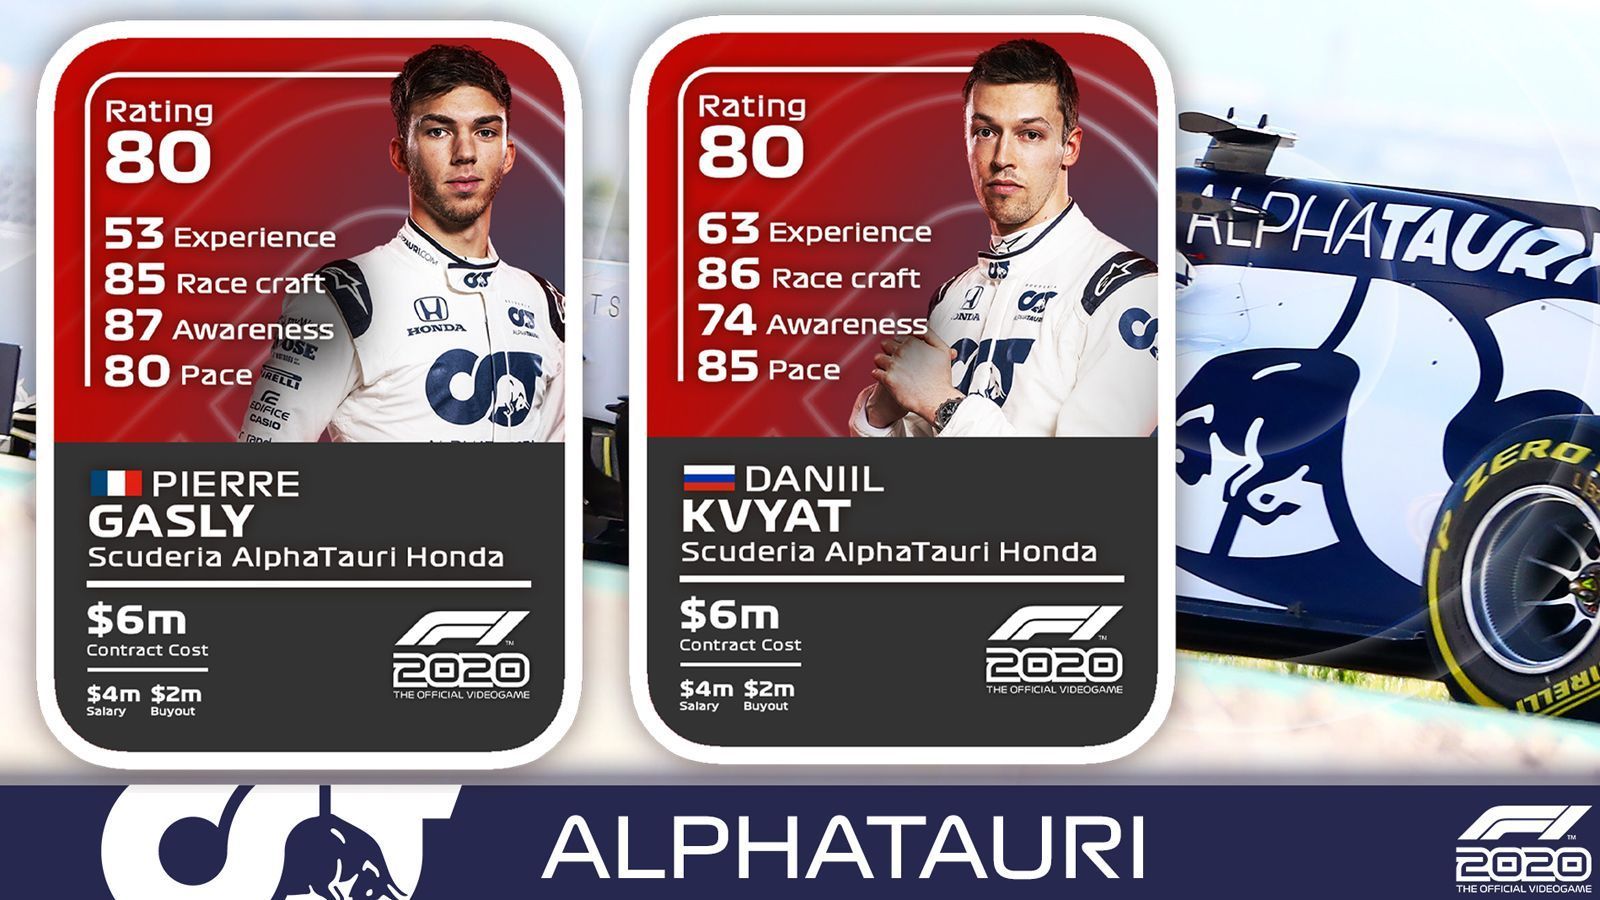 
                <strong>AlphaTauri</strong><br>
                Pierre Gasly: Erfahrung 53, Fahrkunst 85, Bewusstsein 87, Pace 80, Overall Rating 80Daniil Kvyat: Erfahrung 63, Fahrkunst 86, Bewusstsein 74, Pace 85, Overall Rating 80
              